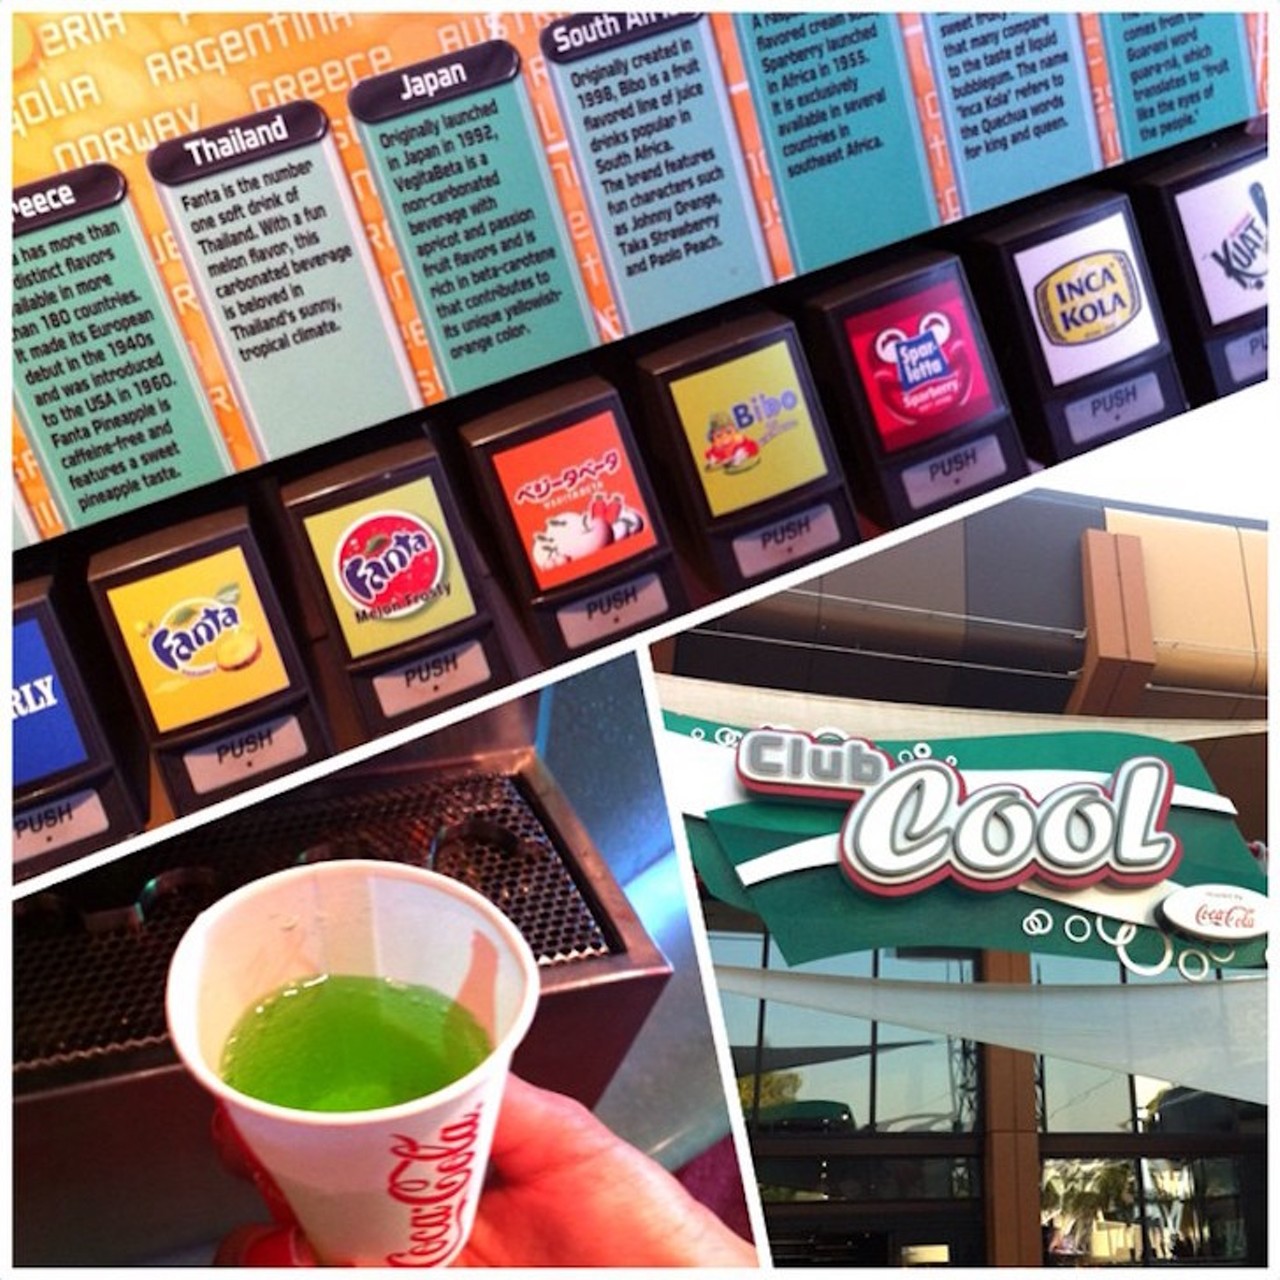 Try Beverly
You haven&#146;t truly experienced Epcot until you&#146;ve tried the odd, disgusting Beverly beverage at Club Cool. The Italian soda will make you question why it ever should exist and how this can still be a thing even while other sodas have failed. 
Photo via meudestinoorlando/Instagram